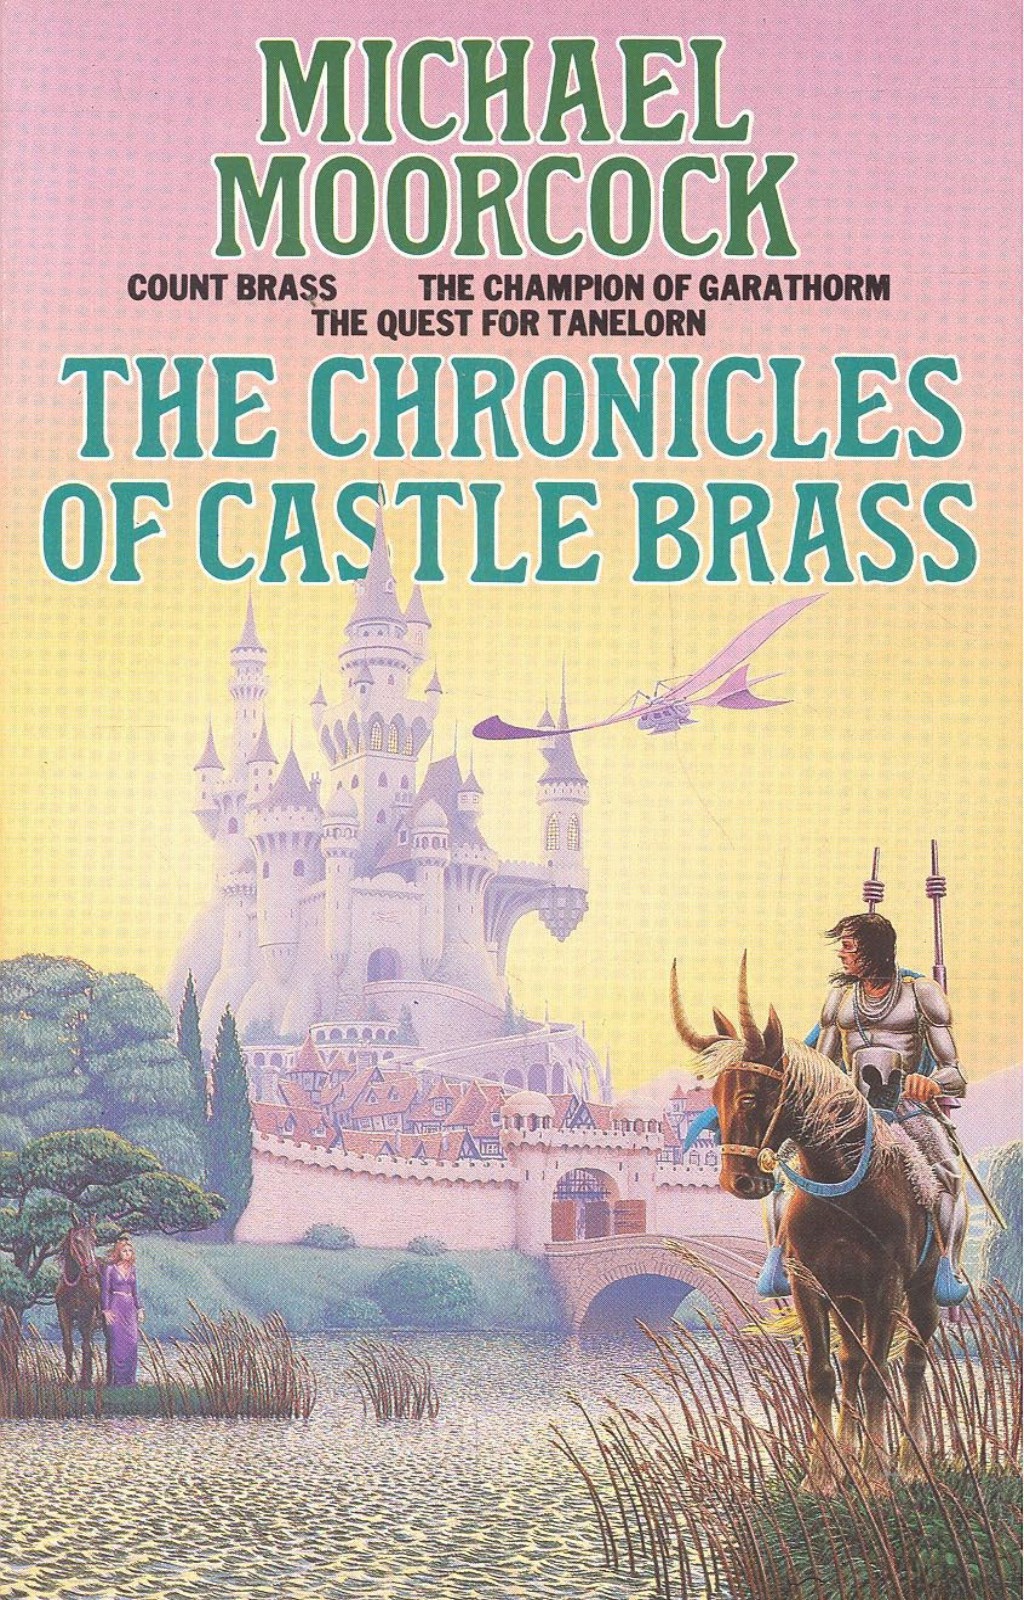 The Chronicles of Castle Brass